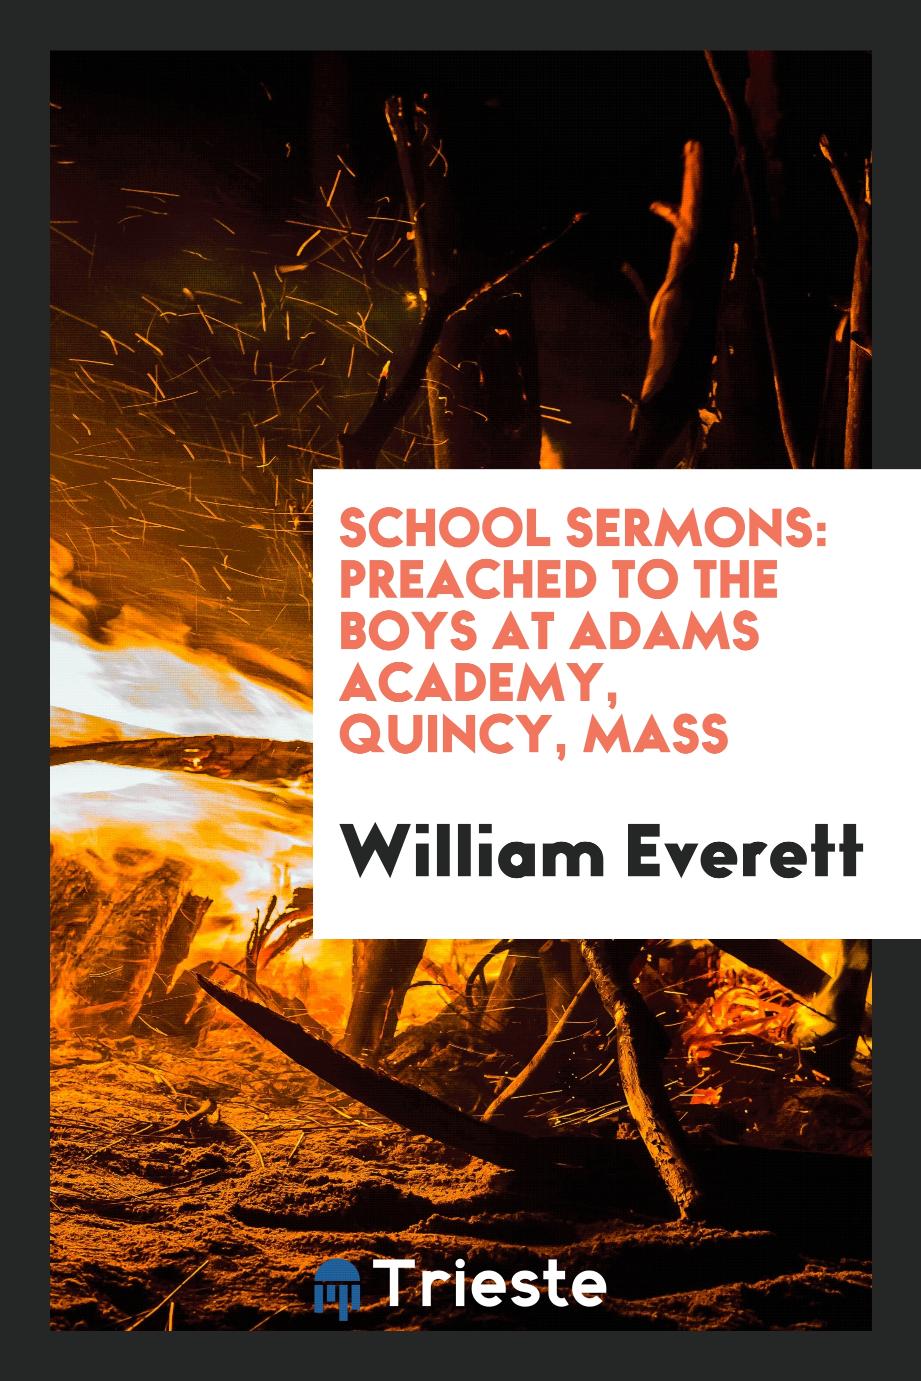 School Sermons: Preached to the Boys at Adams Academy, Quincy, Mass